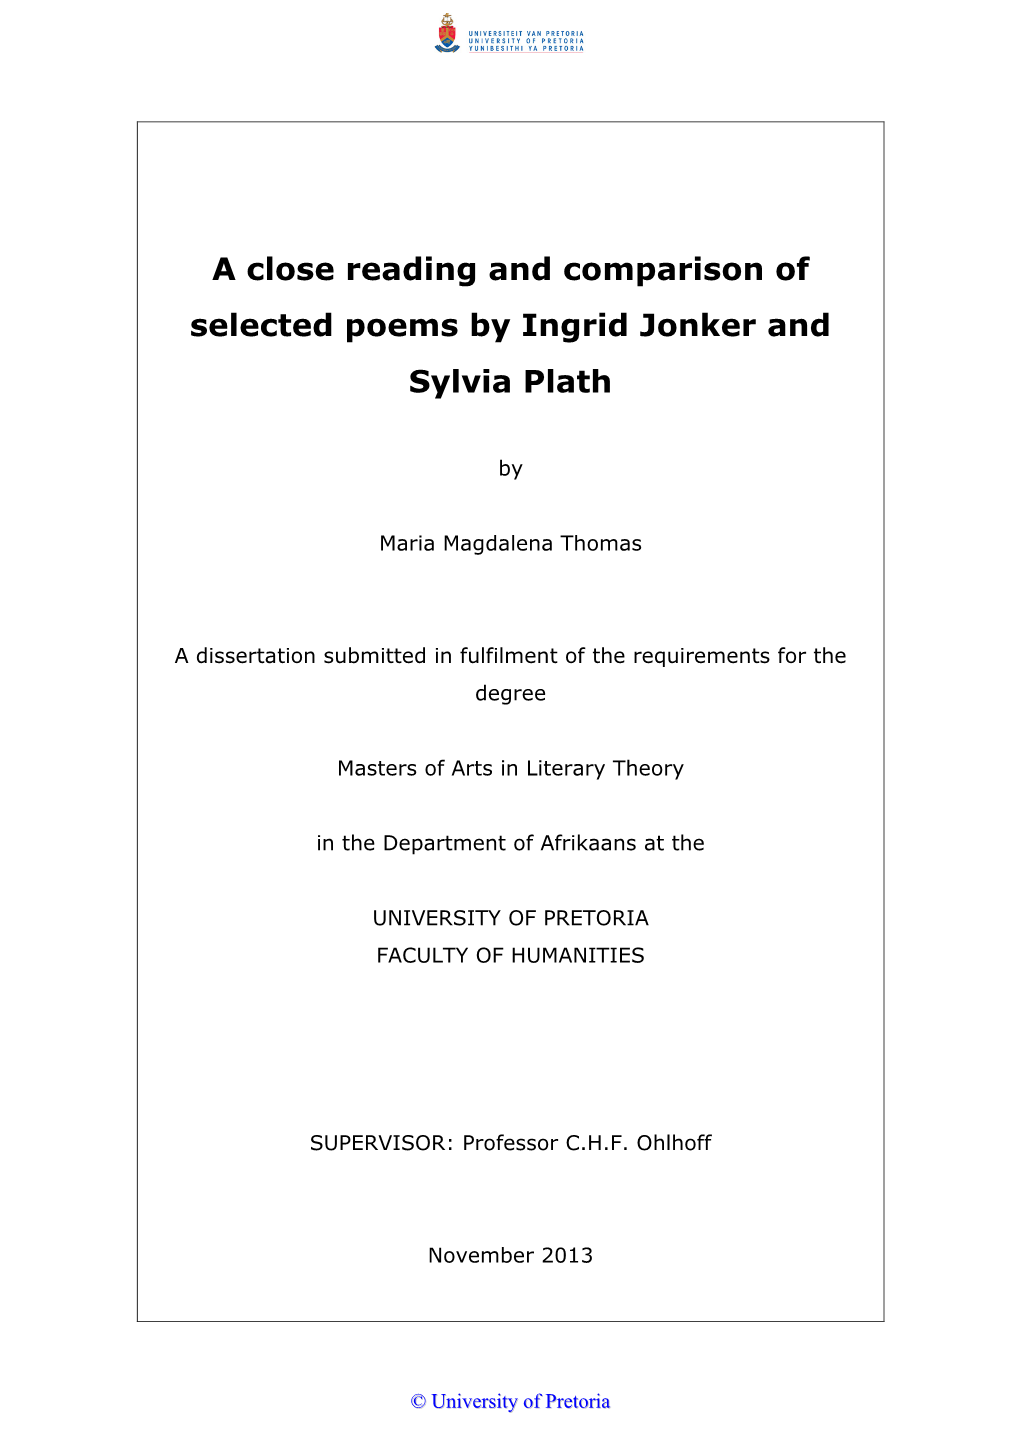 A Close Reading and Comparison of Selected Poems by Ingrid Jonker and Sylvia Plath